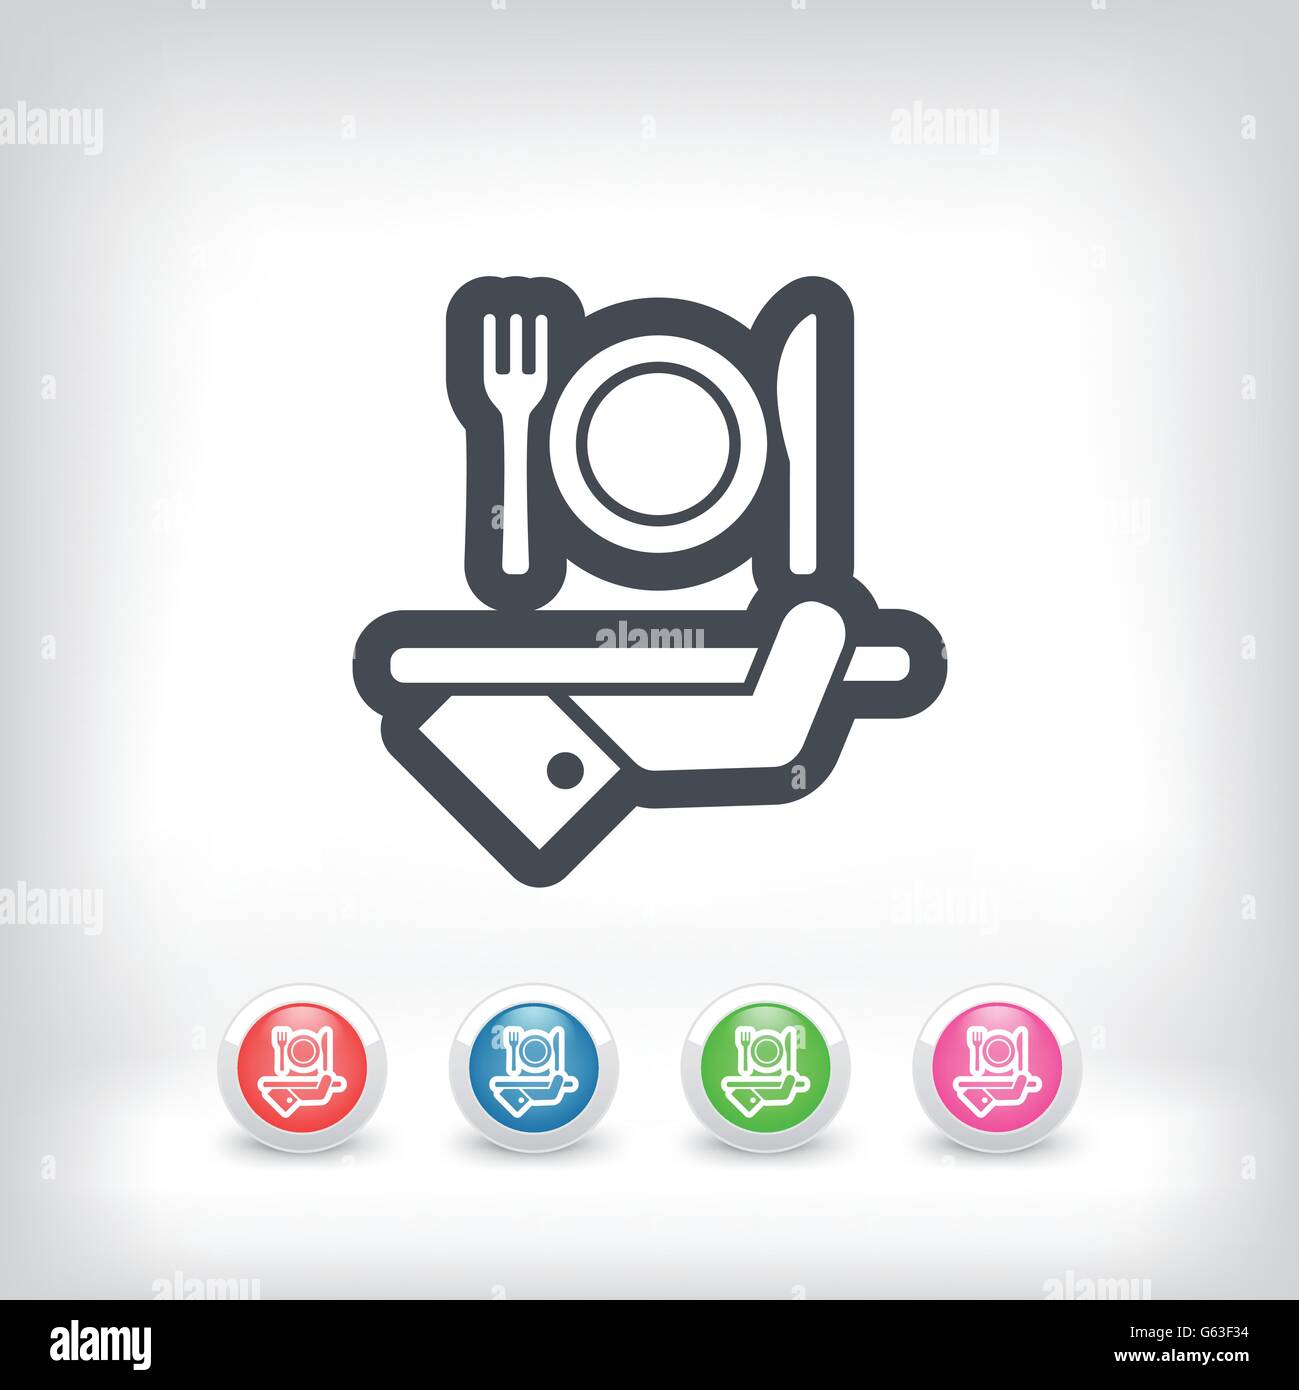 Hotel icons. Food. Stock Vector